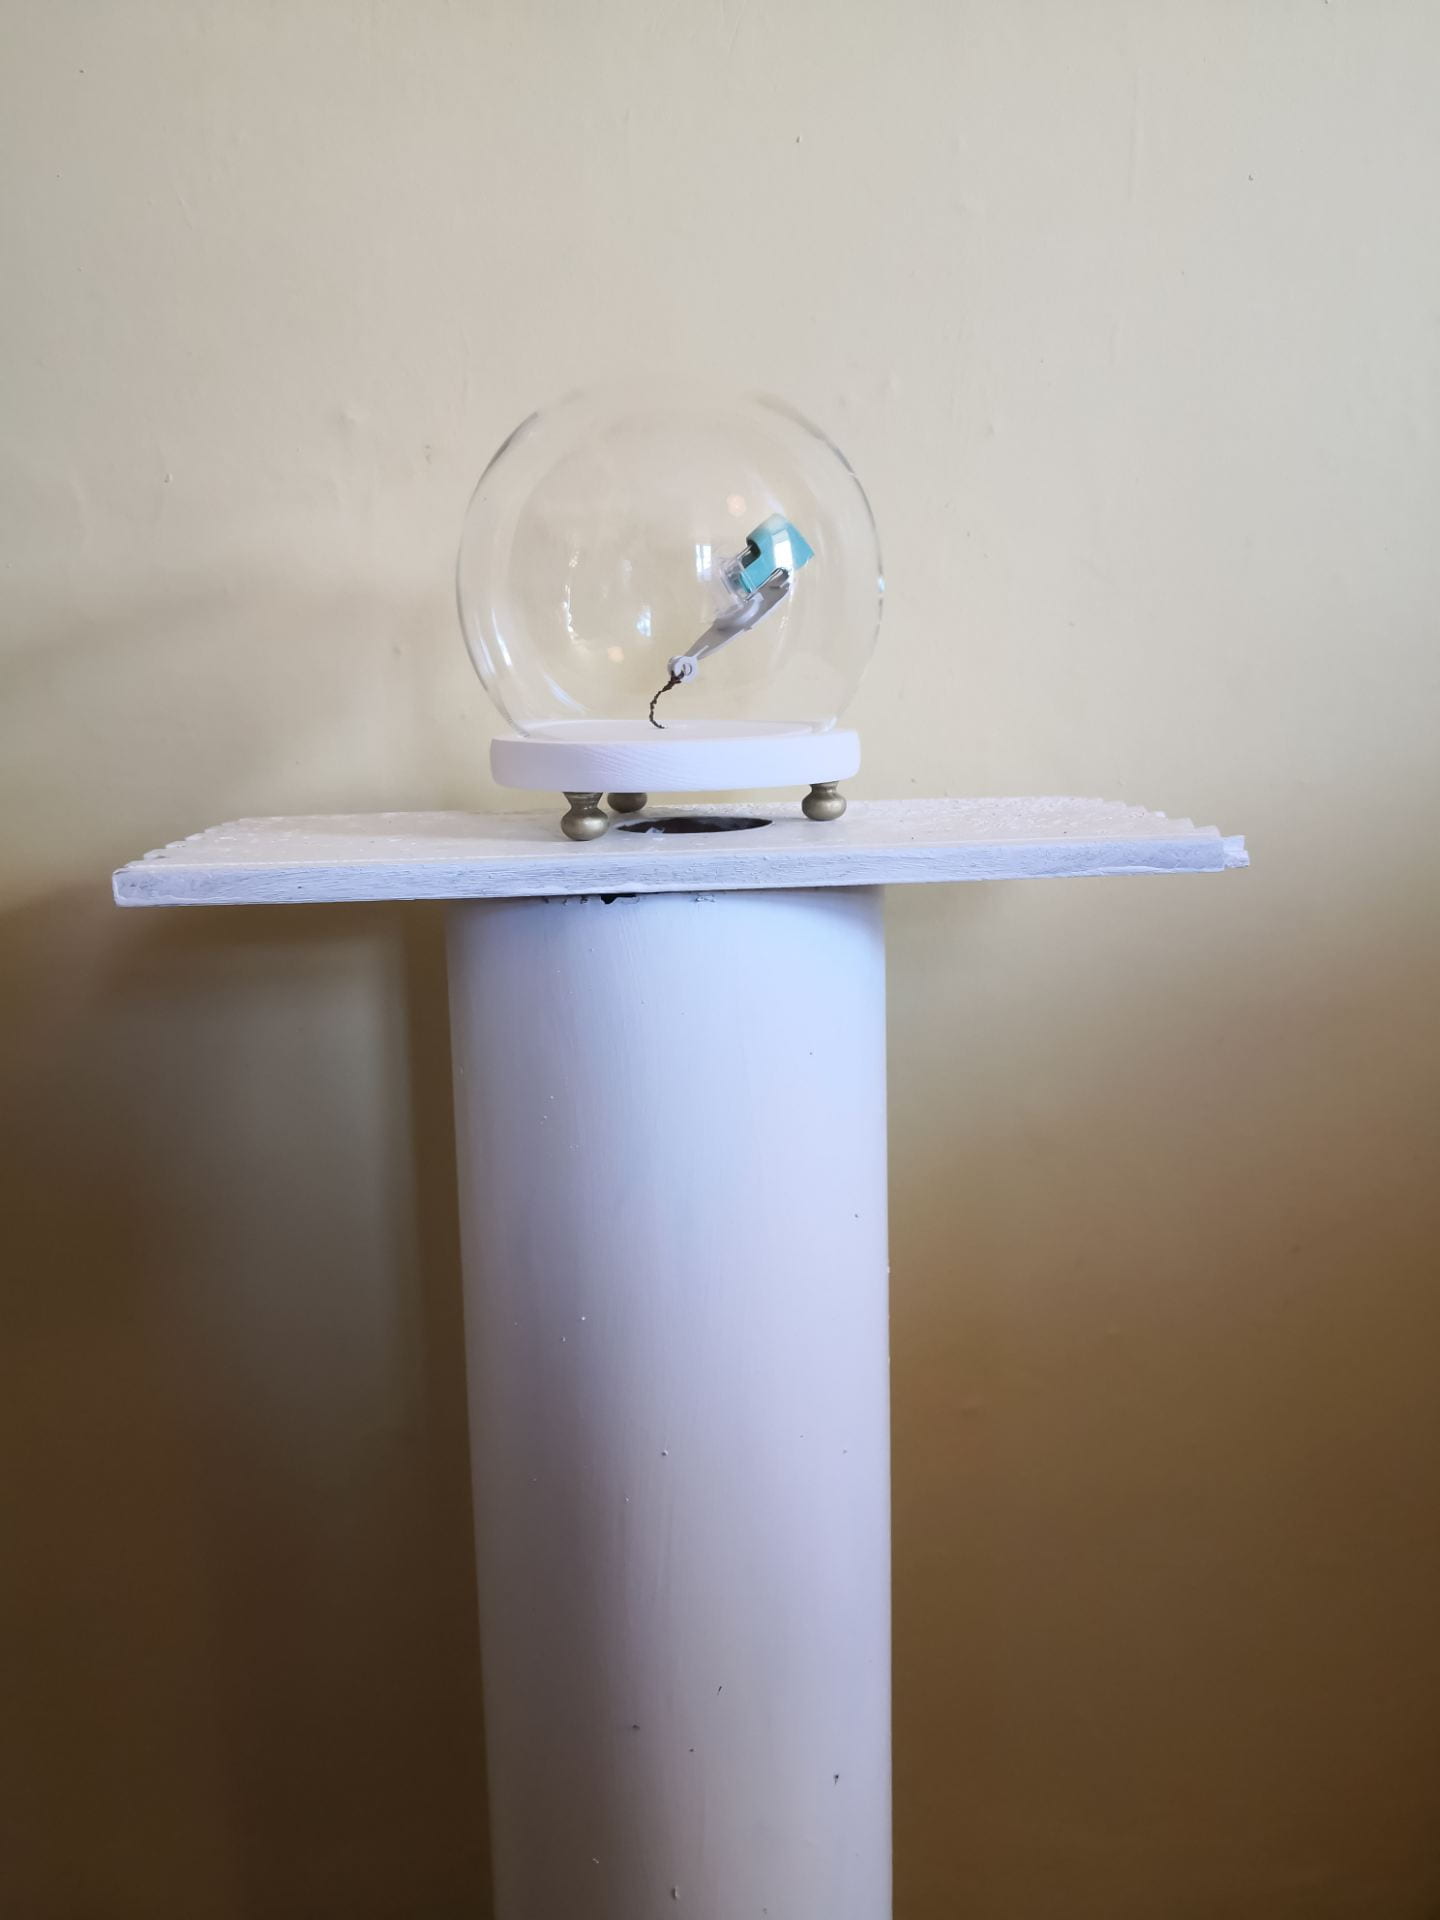 A glass bubble containing a blue fragment of an inhaler, sat on a white plinth